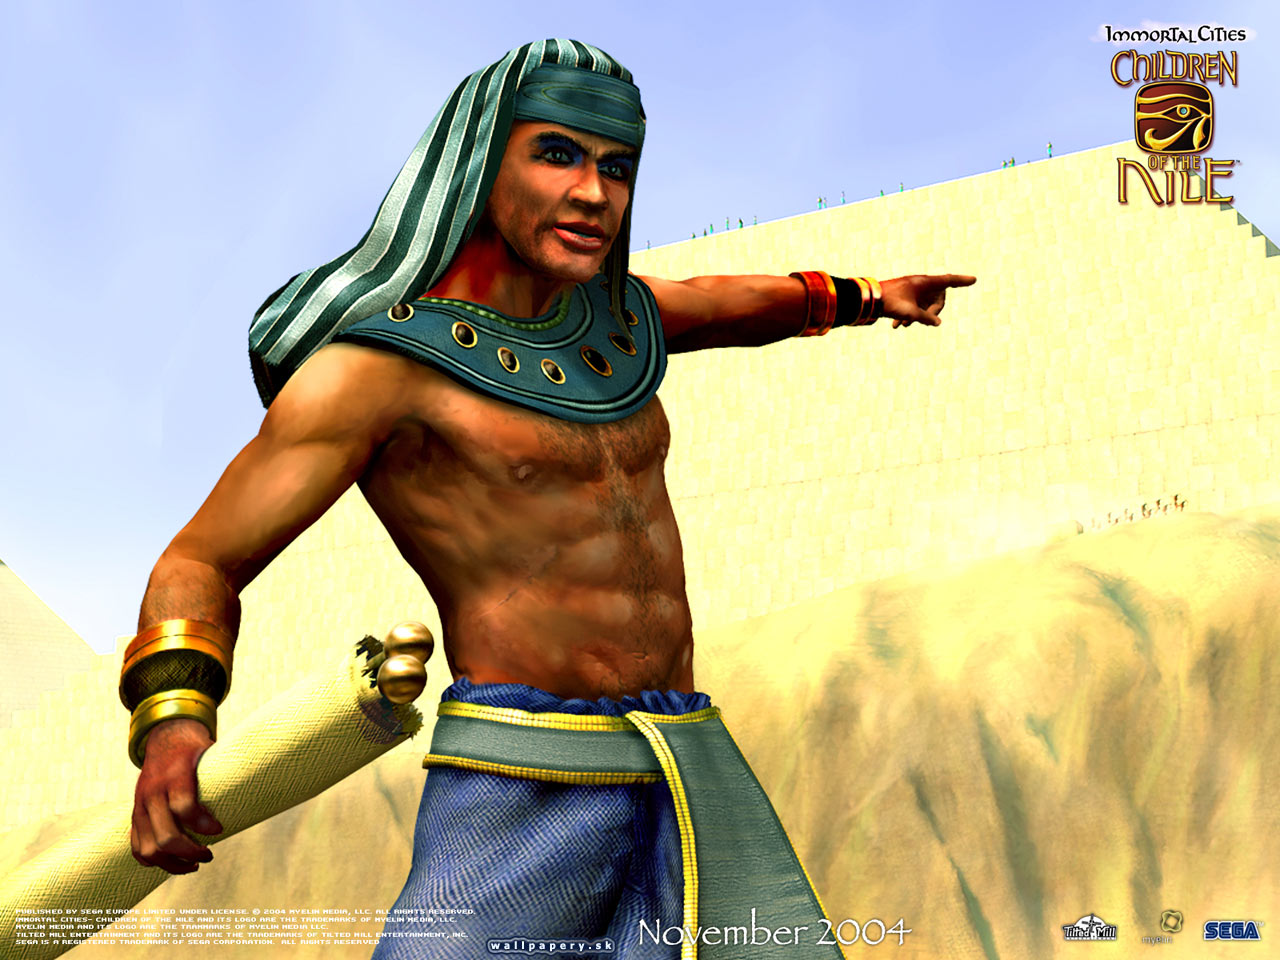 Immortal Cities: Children of the Nile - wallpaper 5